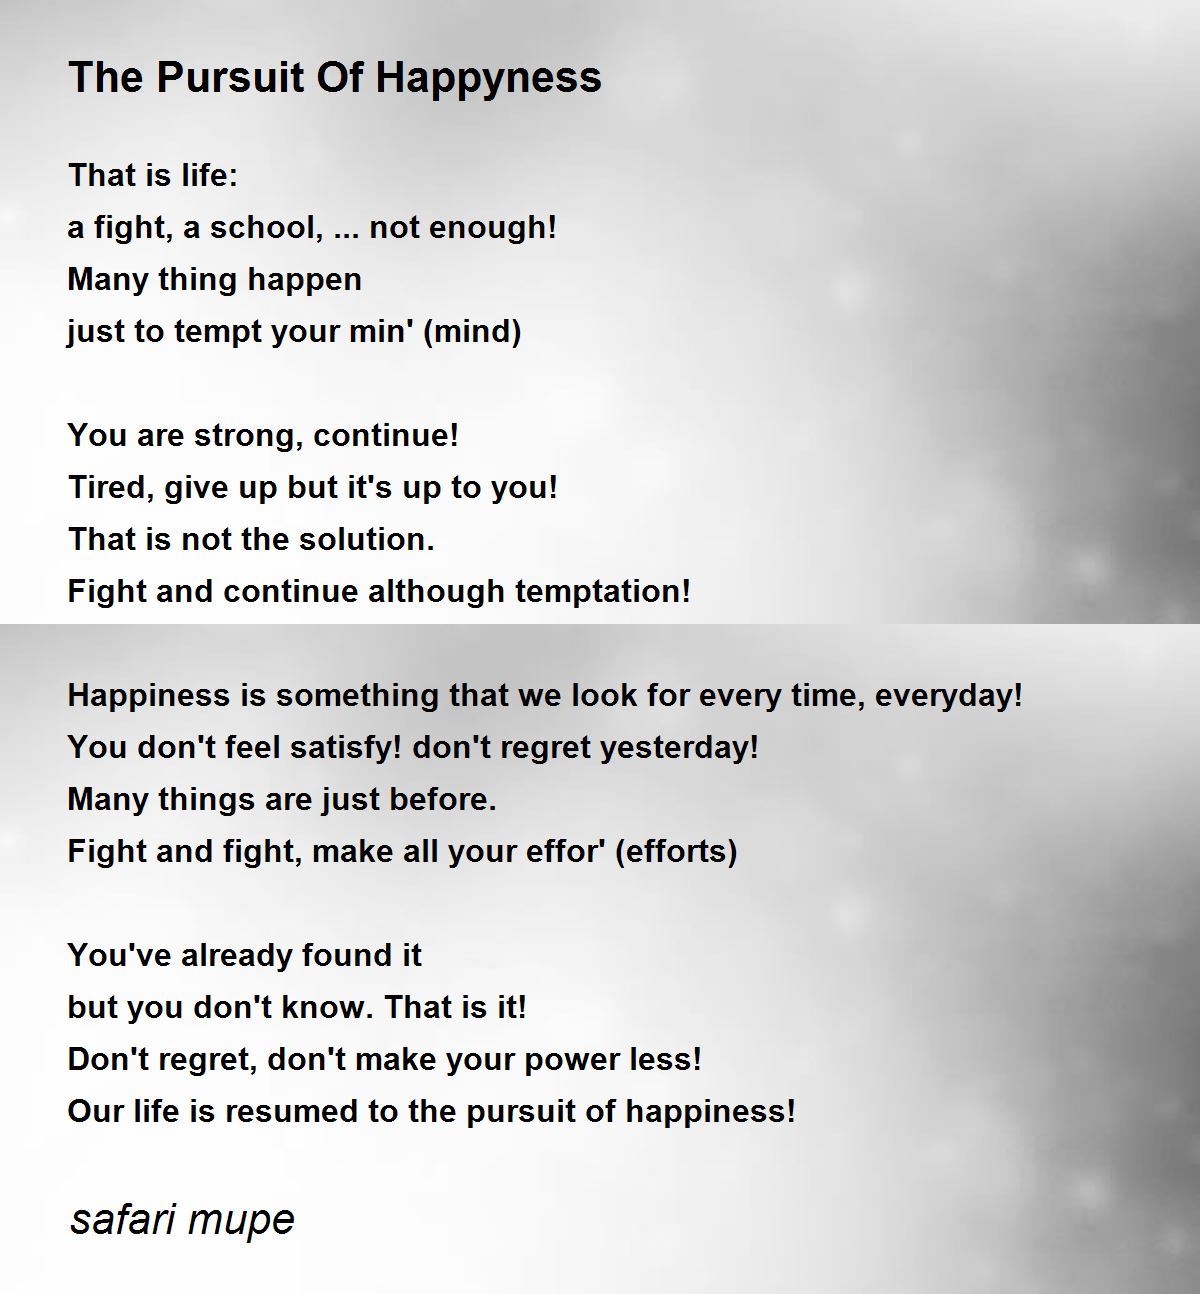 The Pursuit of Happiness | Visual.ly